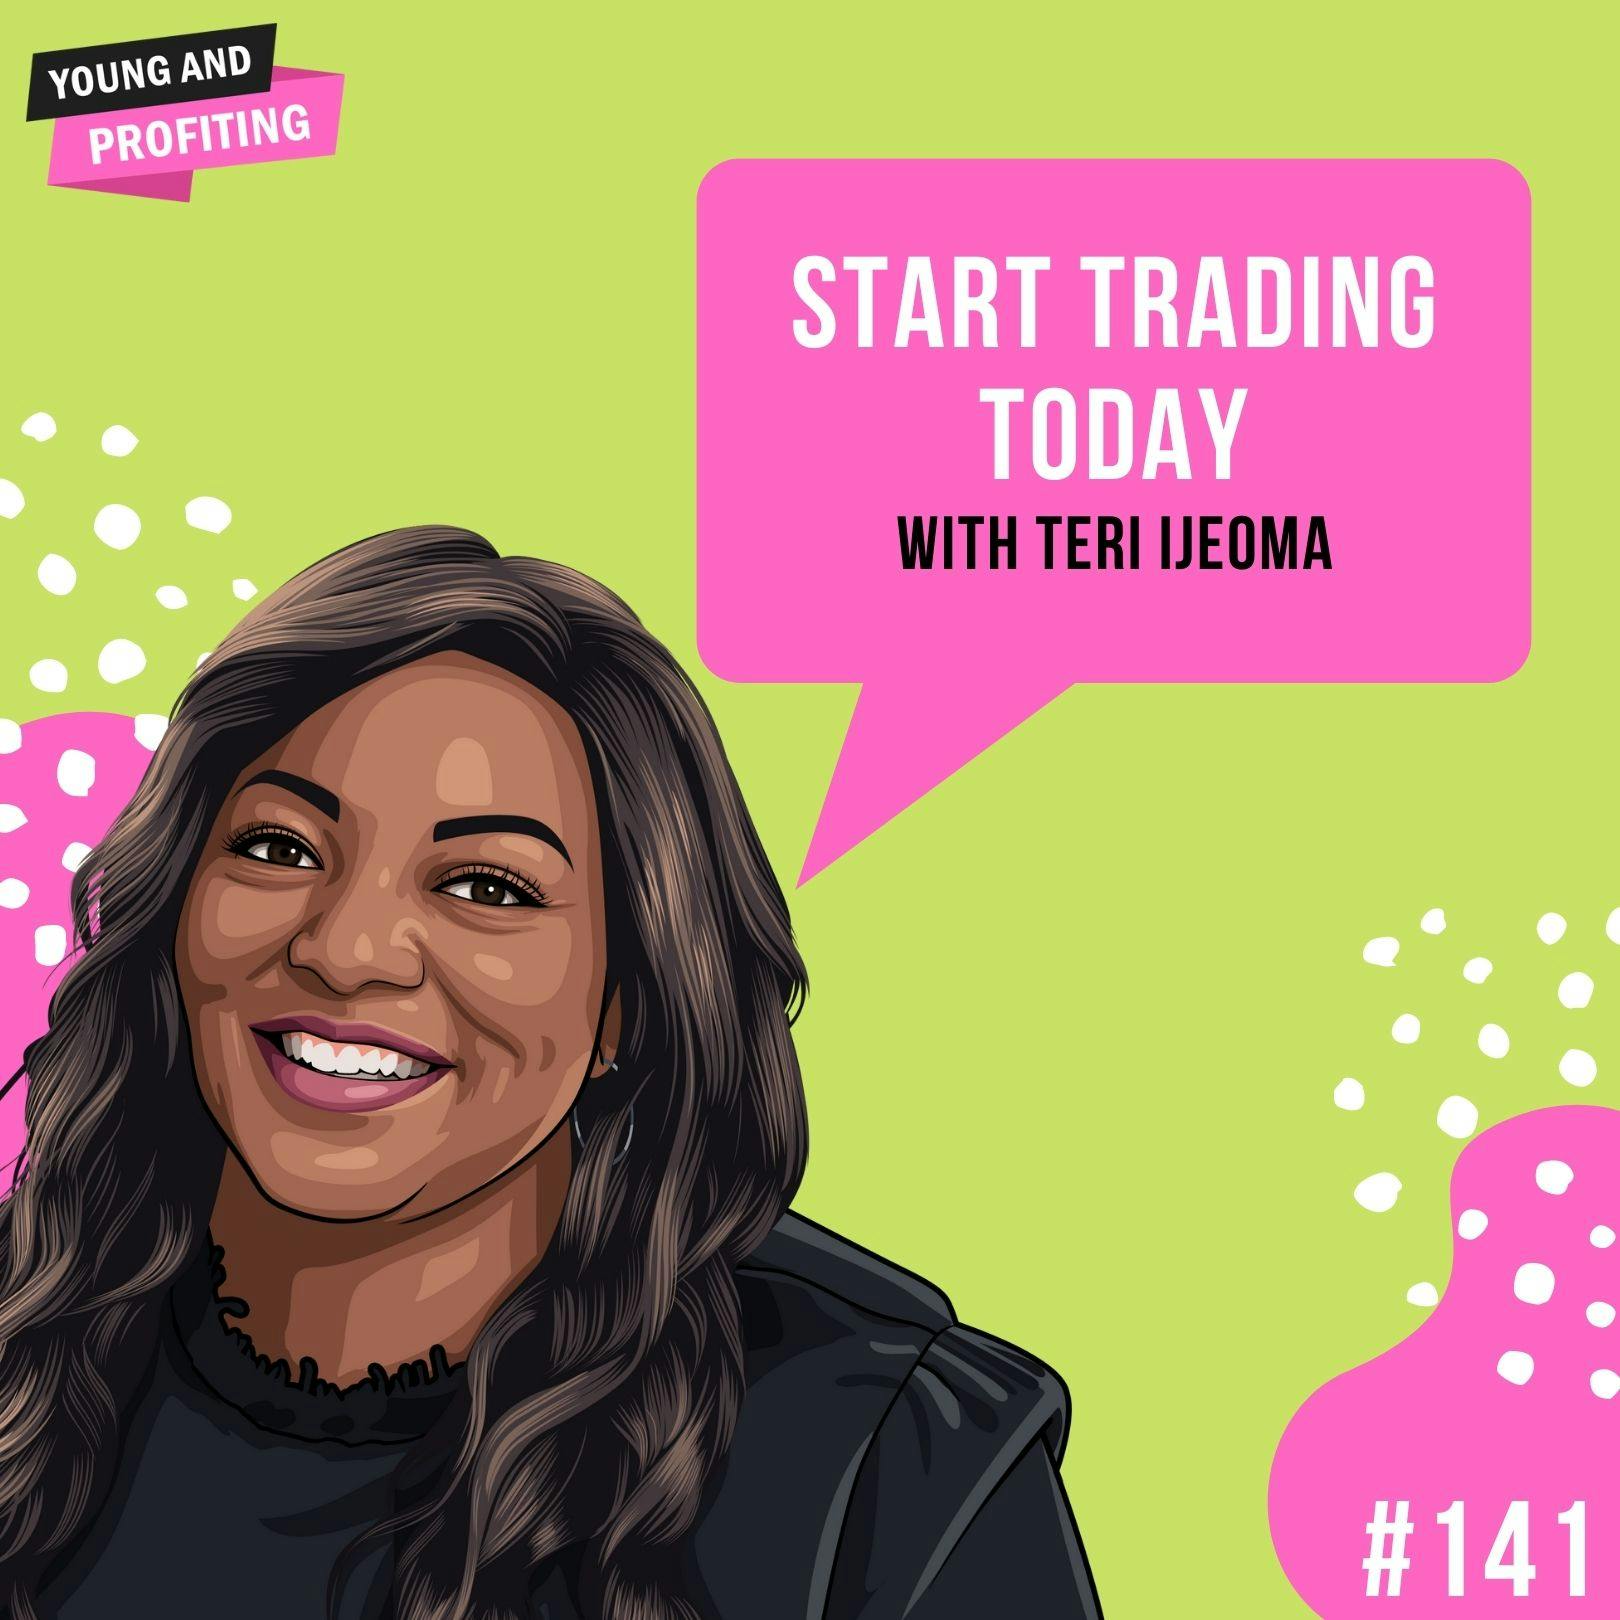 #141: Start Trading Today with Teri Ijeoma